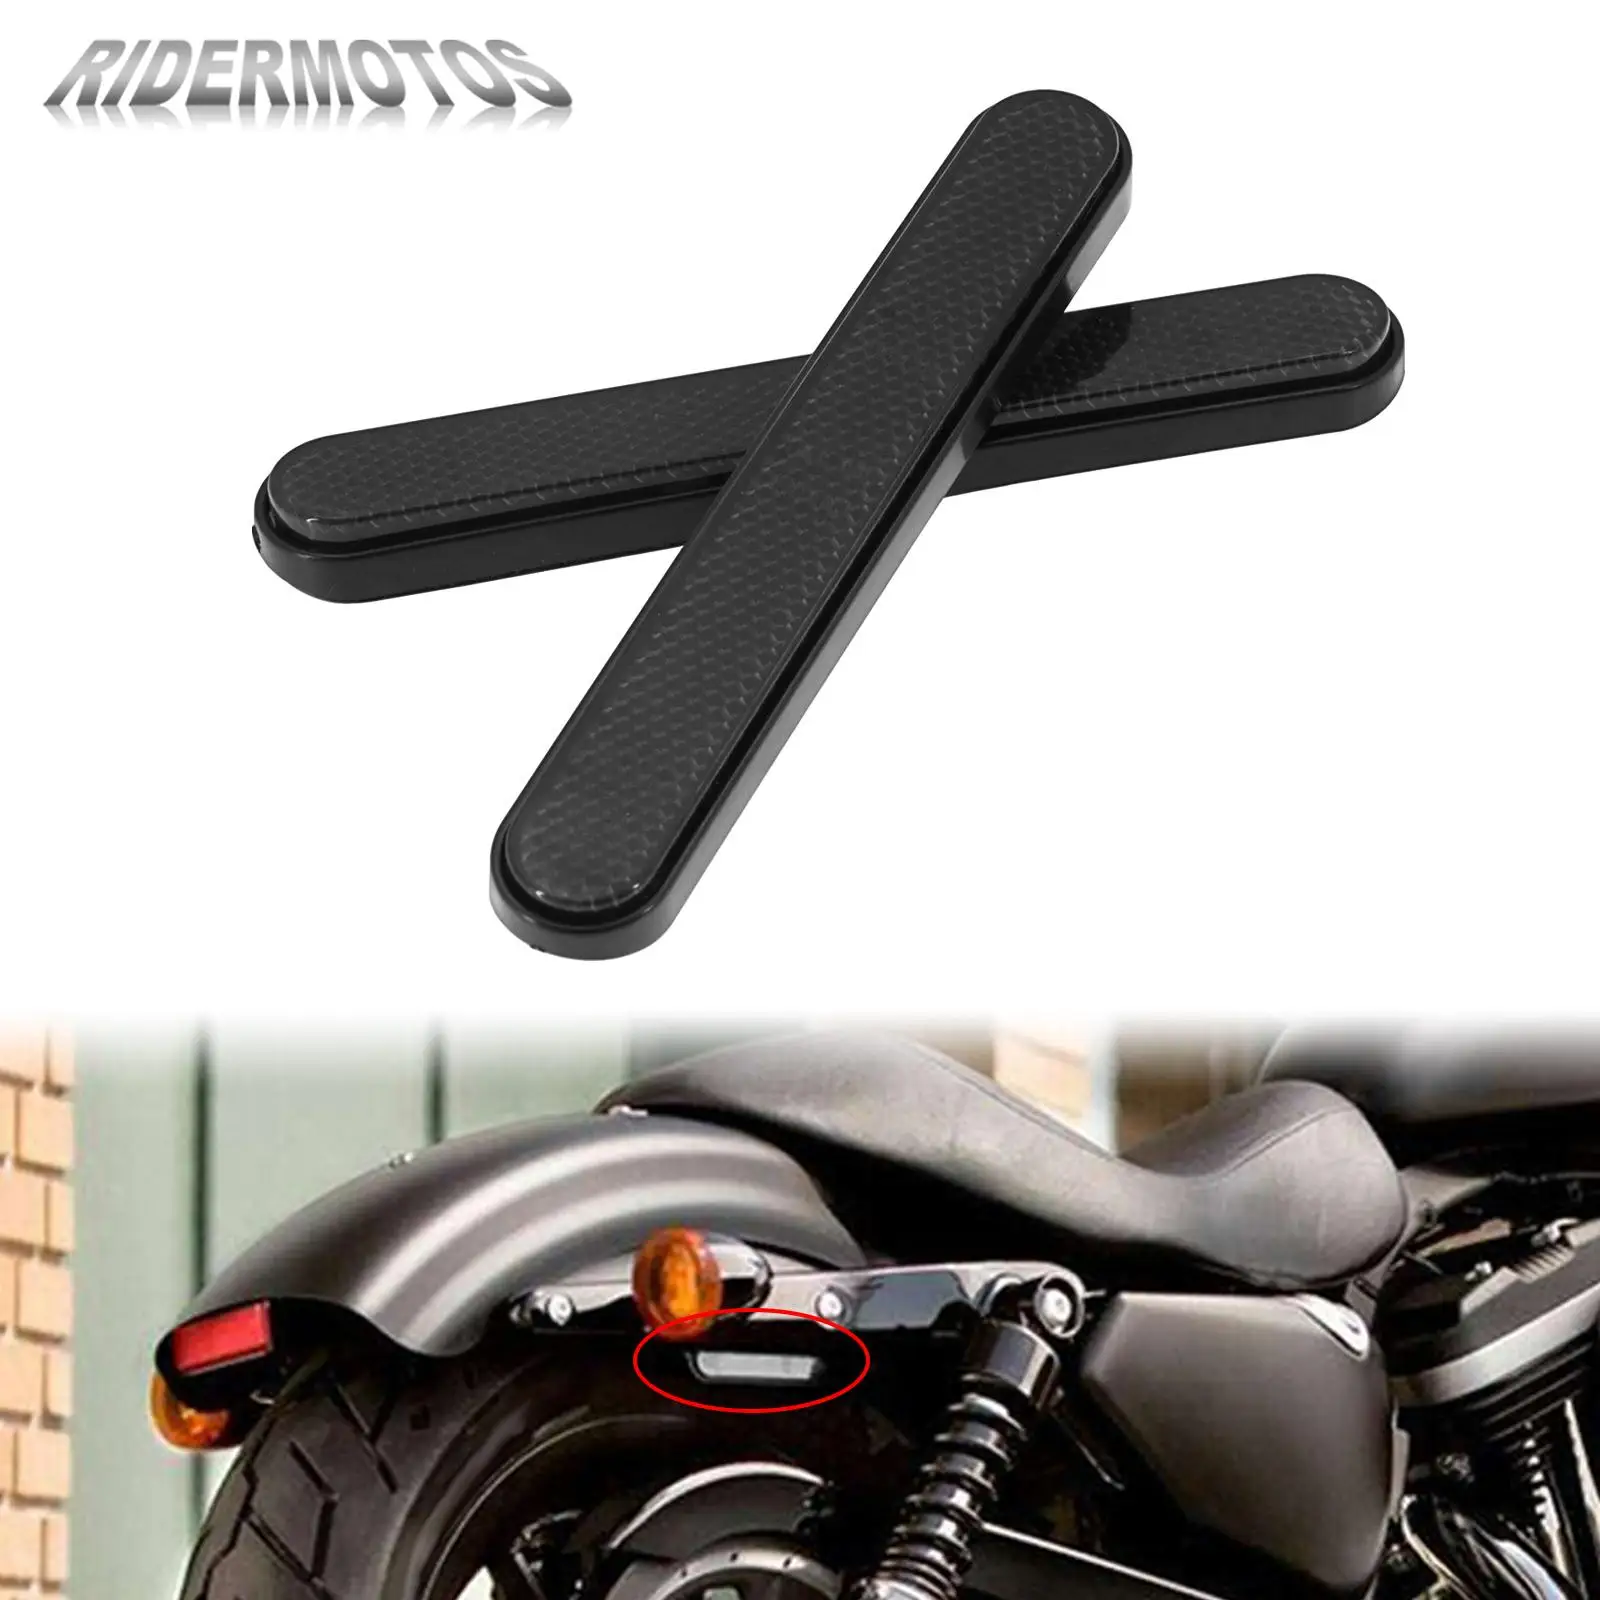 

Motorcycle Front Fork Reflector Sticker Lower Legs Slider Safety Warning For Harley Touring Street Glide Sportster Softail Dyna